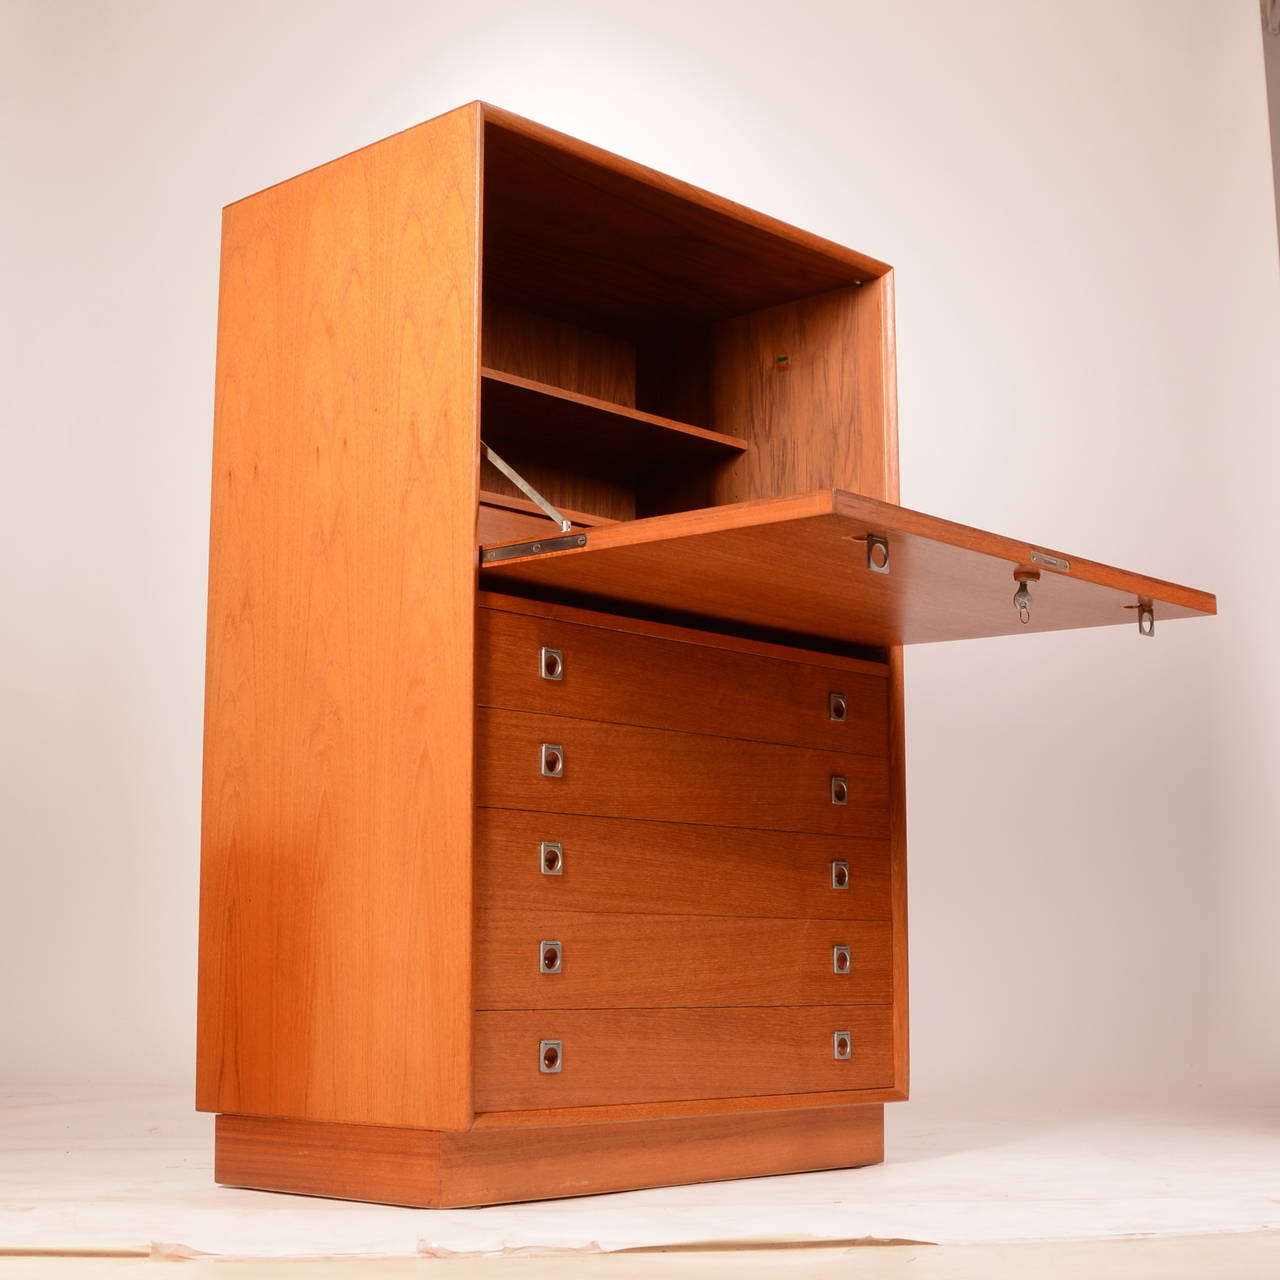 Features doored cabinet space and opposite open space. 
Made from beautifully selected teak and leather desk surface. This piece is in excellent condition.